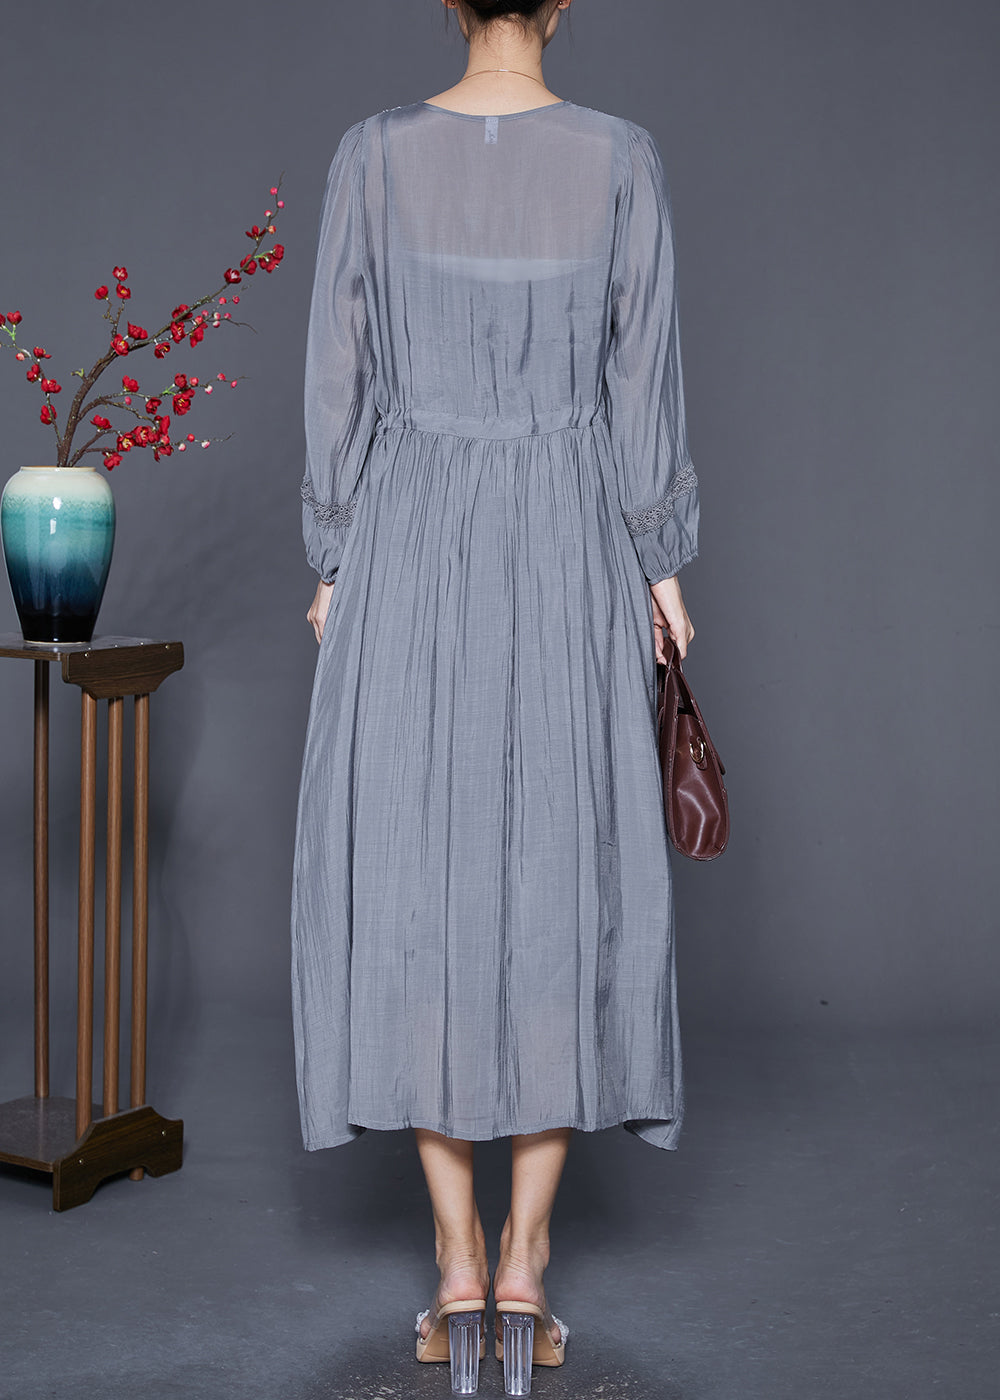 Natural Grey Embroideried Cinched Patchwork Cotton Dresses Summer